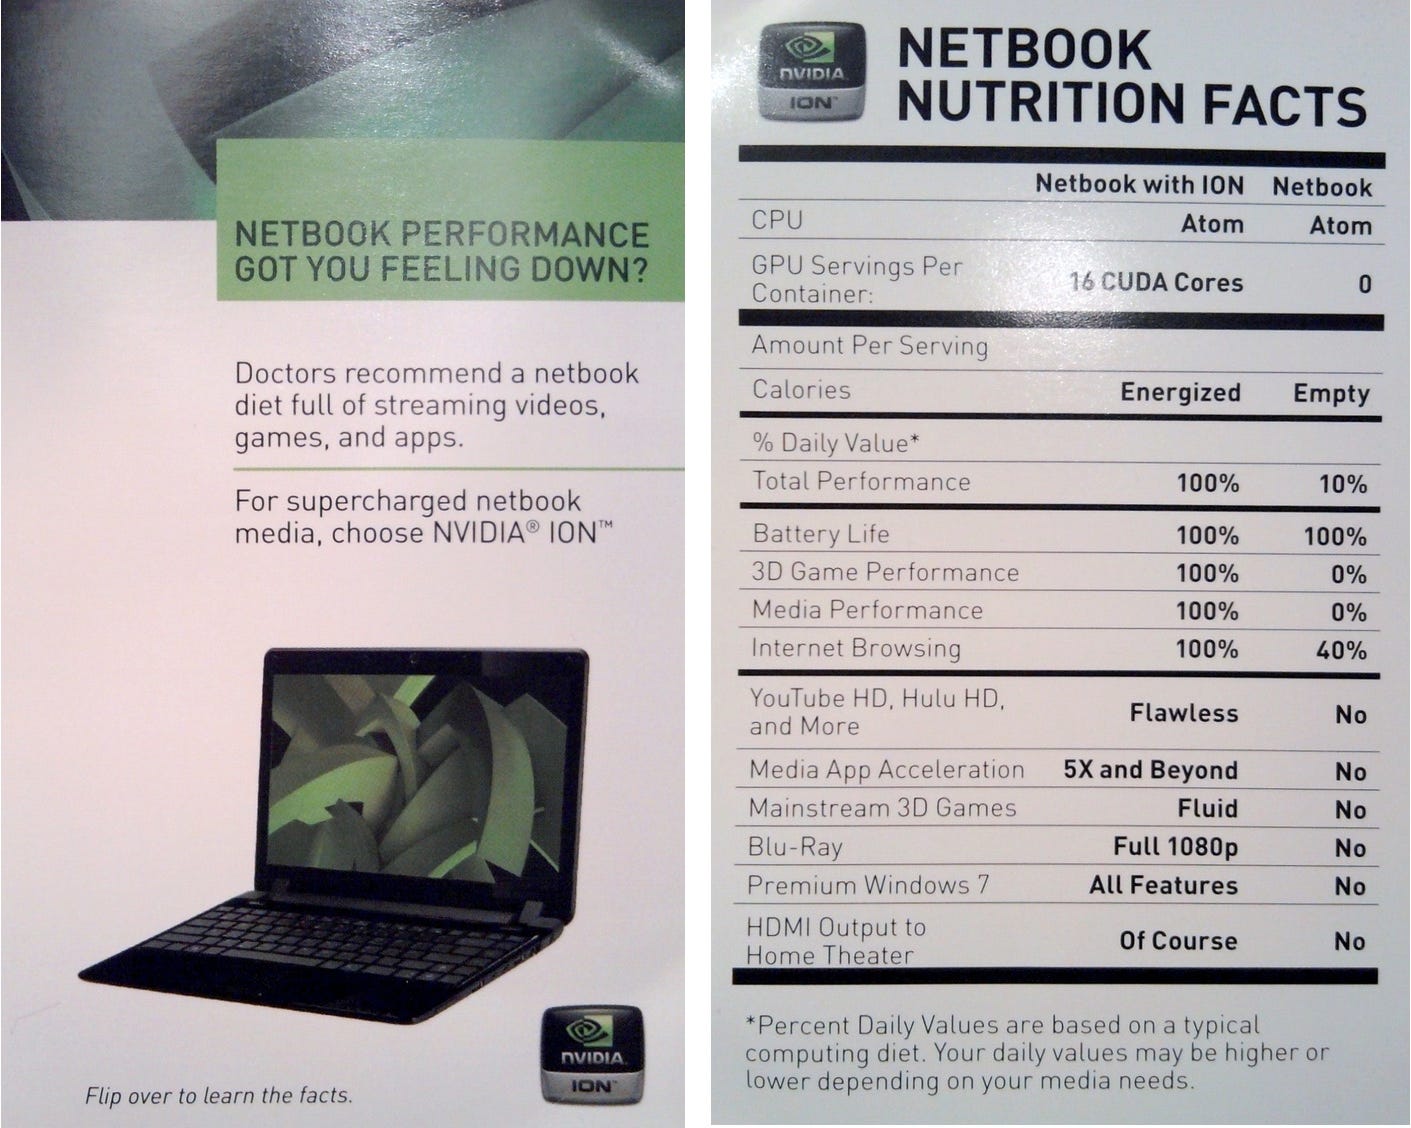 NETBOOK PERFORMANCE GOT YOU FEELING DOWN? Doctors recommend a netbook diet full of streaming videos, games, and apps. For supercharged netbook media, choose NVIDIA® ION™ nVIDIA ION Flip over to learn the facts. nVIDIA ION NETBOOK NUTRITION FACTS Netbook with ION Netbook Atom Atom 16 CUDA Cores 0 CPU GPU Servings Per Container: Amount Per Serving Calories Energized % Daily Value* Total Performance 100% Battery Life 3D Game Performance Media Performance Internet Browsing 100% 100% 100% 100% YouTube HD. Hulu HD, and More Media App Acceleration Mainstream 3D Games Blu-Ray Premium Windows 7 HDMI Output to Home Theater Flawless 5X and Beyond Fluid Full 1080p All Features Of Course Empty 10% 100% 0% 0% 40% No No No No No No *Percent Daily Values are based on a typical computing diet. Your daily values may be higher or lower depending on your media needs.